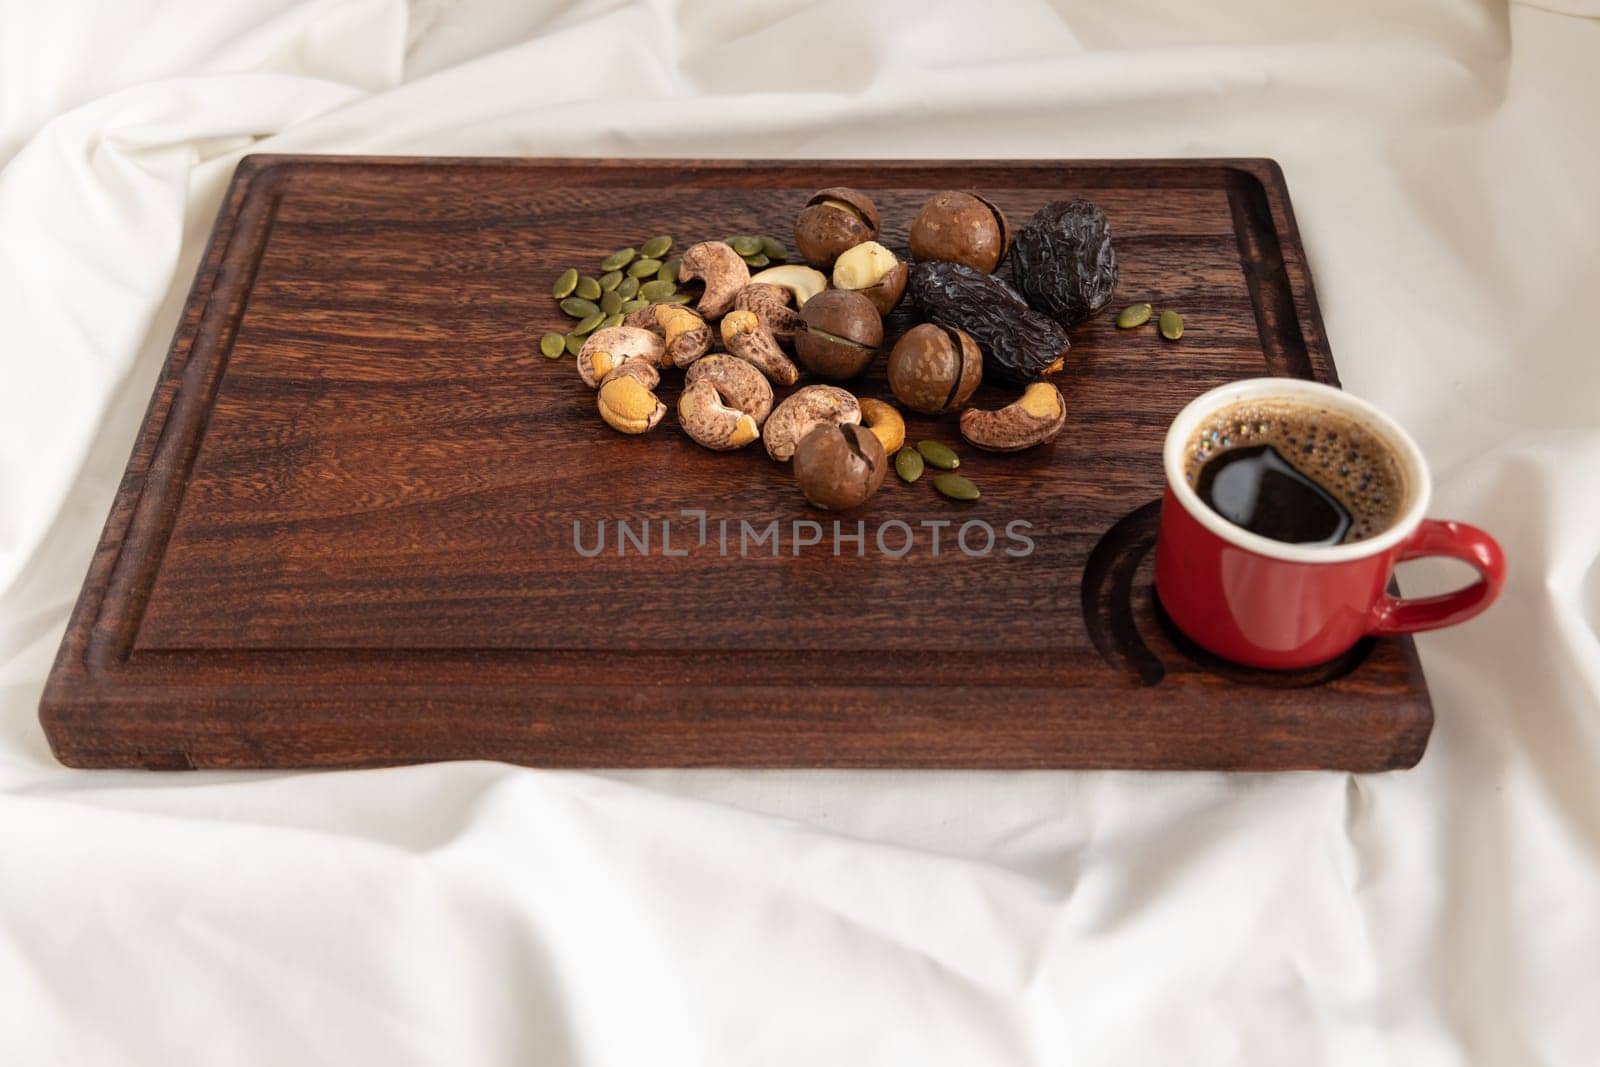 A tasty charcuterie board full of various nuts and coffee for breakfast